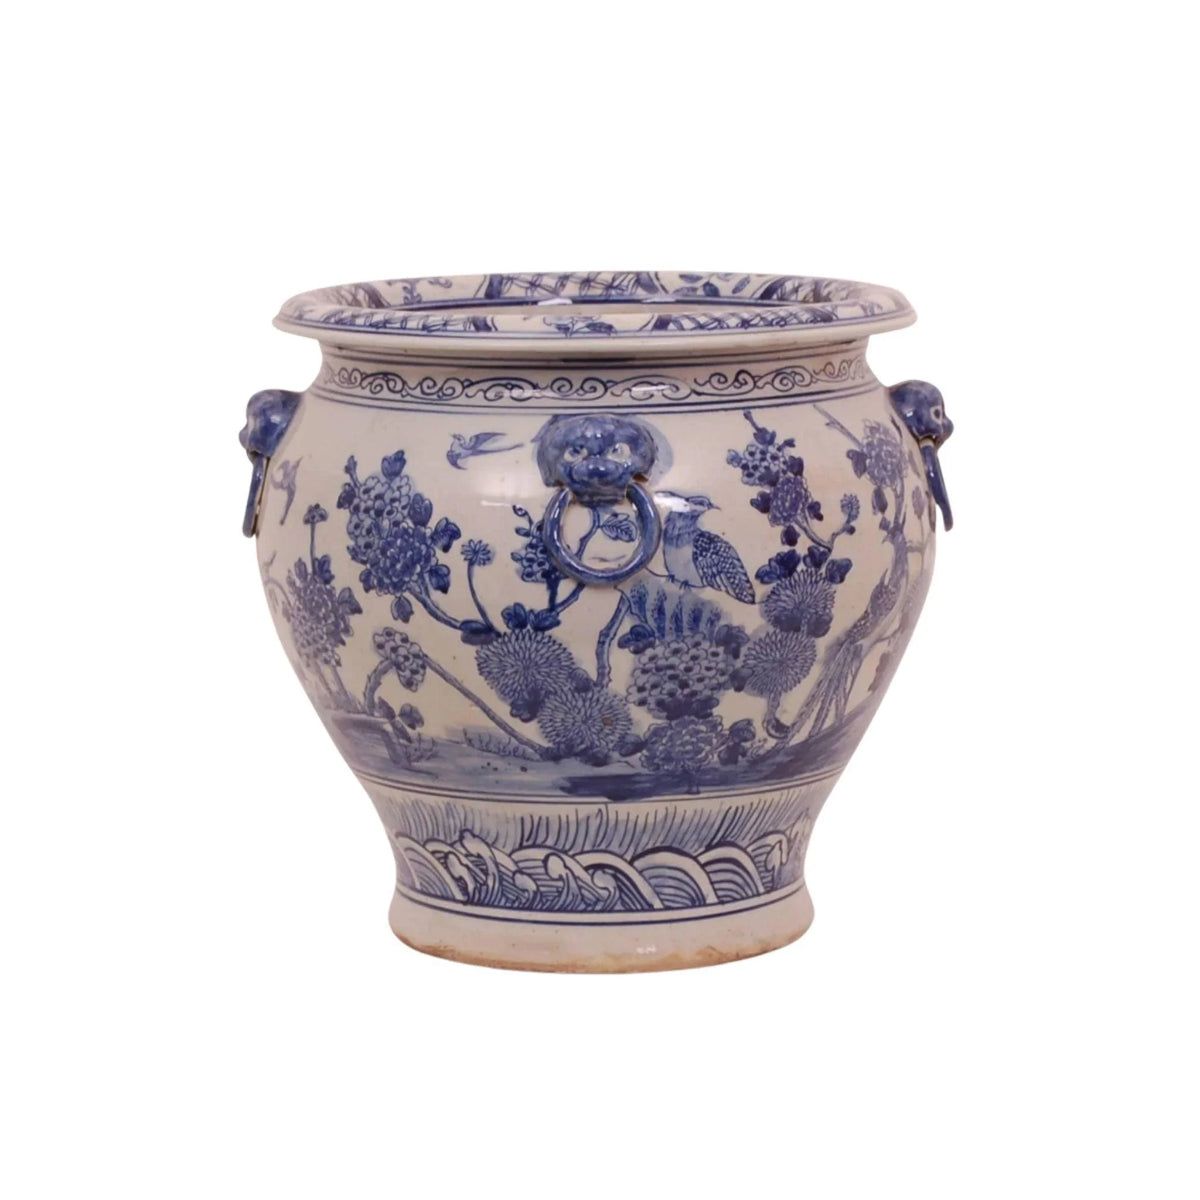 Blue & White Birds and Flowers Porcelain Planter | The Well Appointed House, LLC